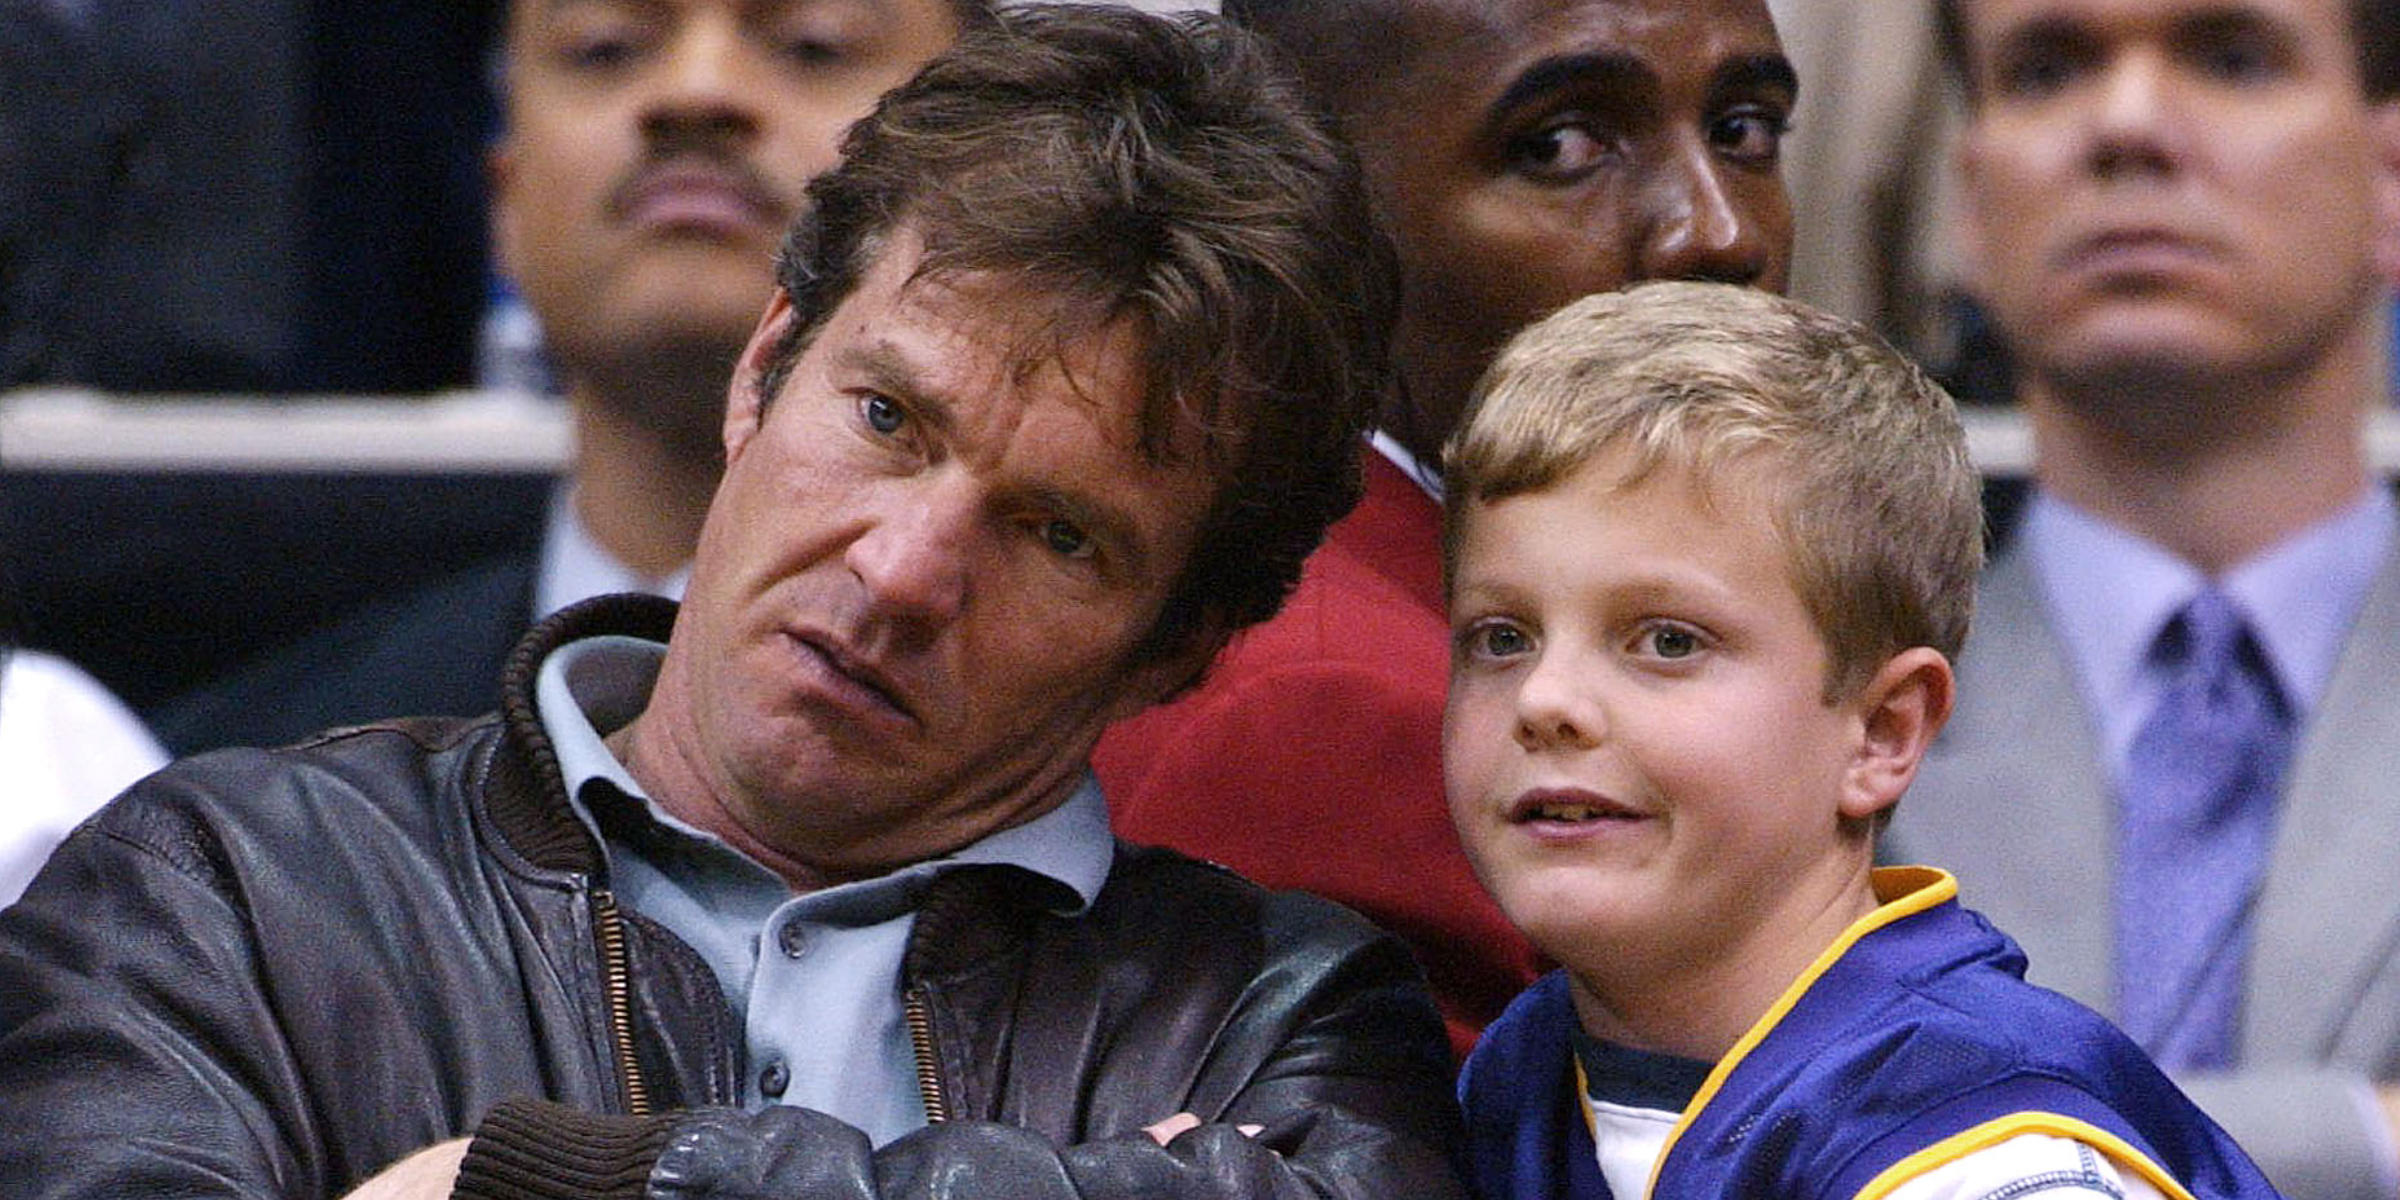 Dennis and Jack Quaid | Source: Getty Images